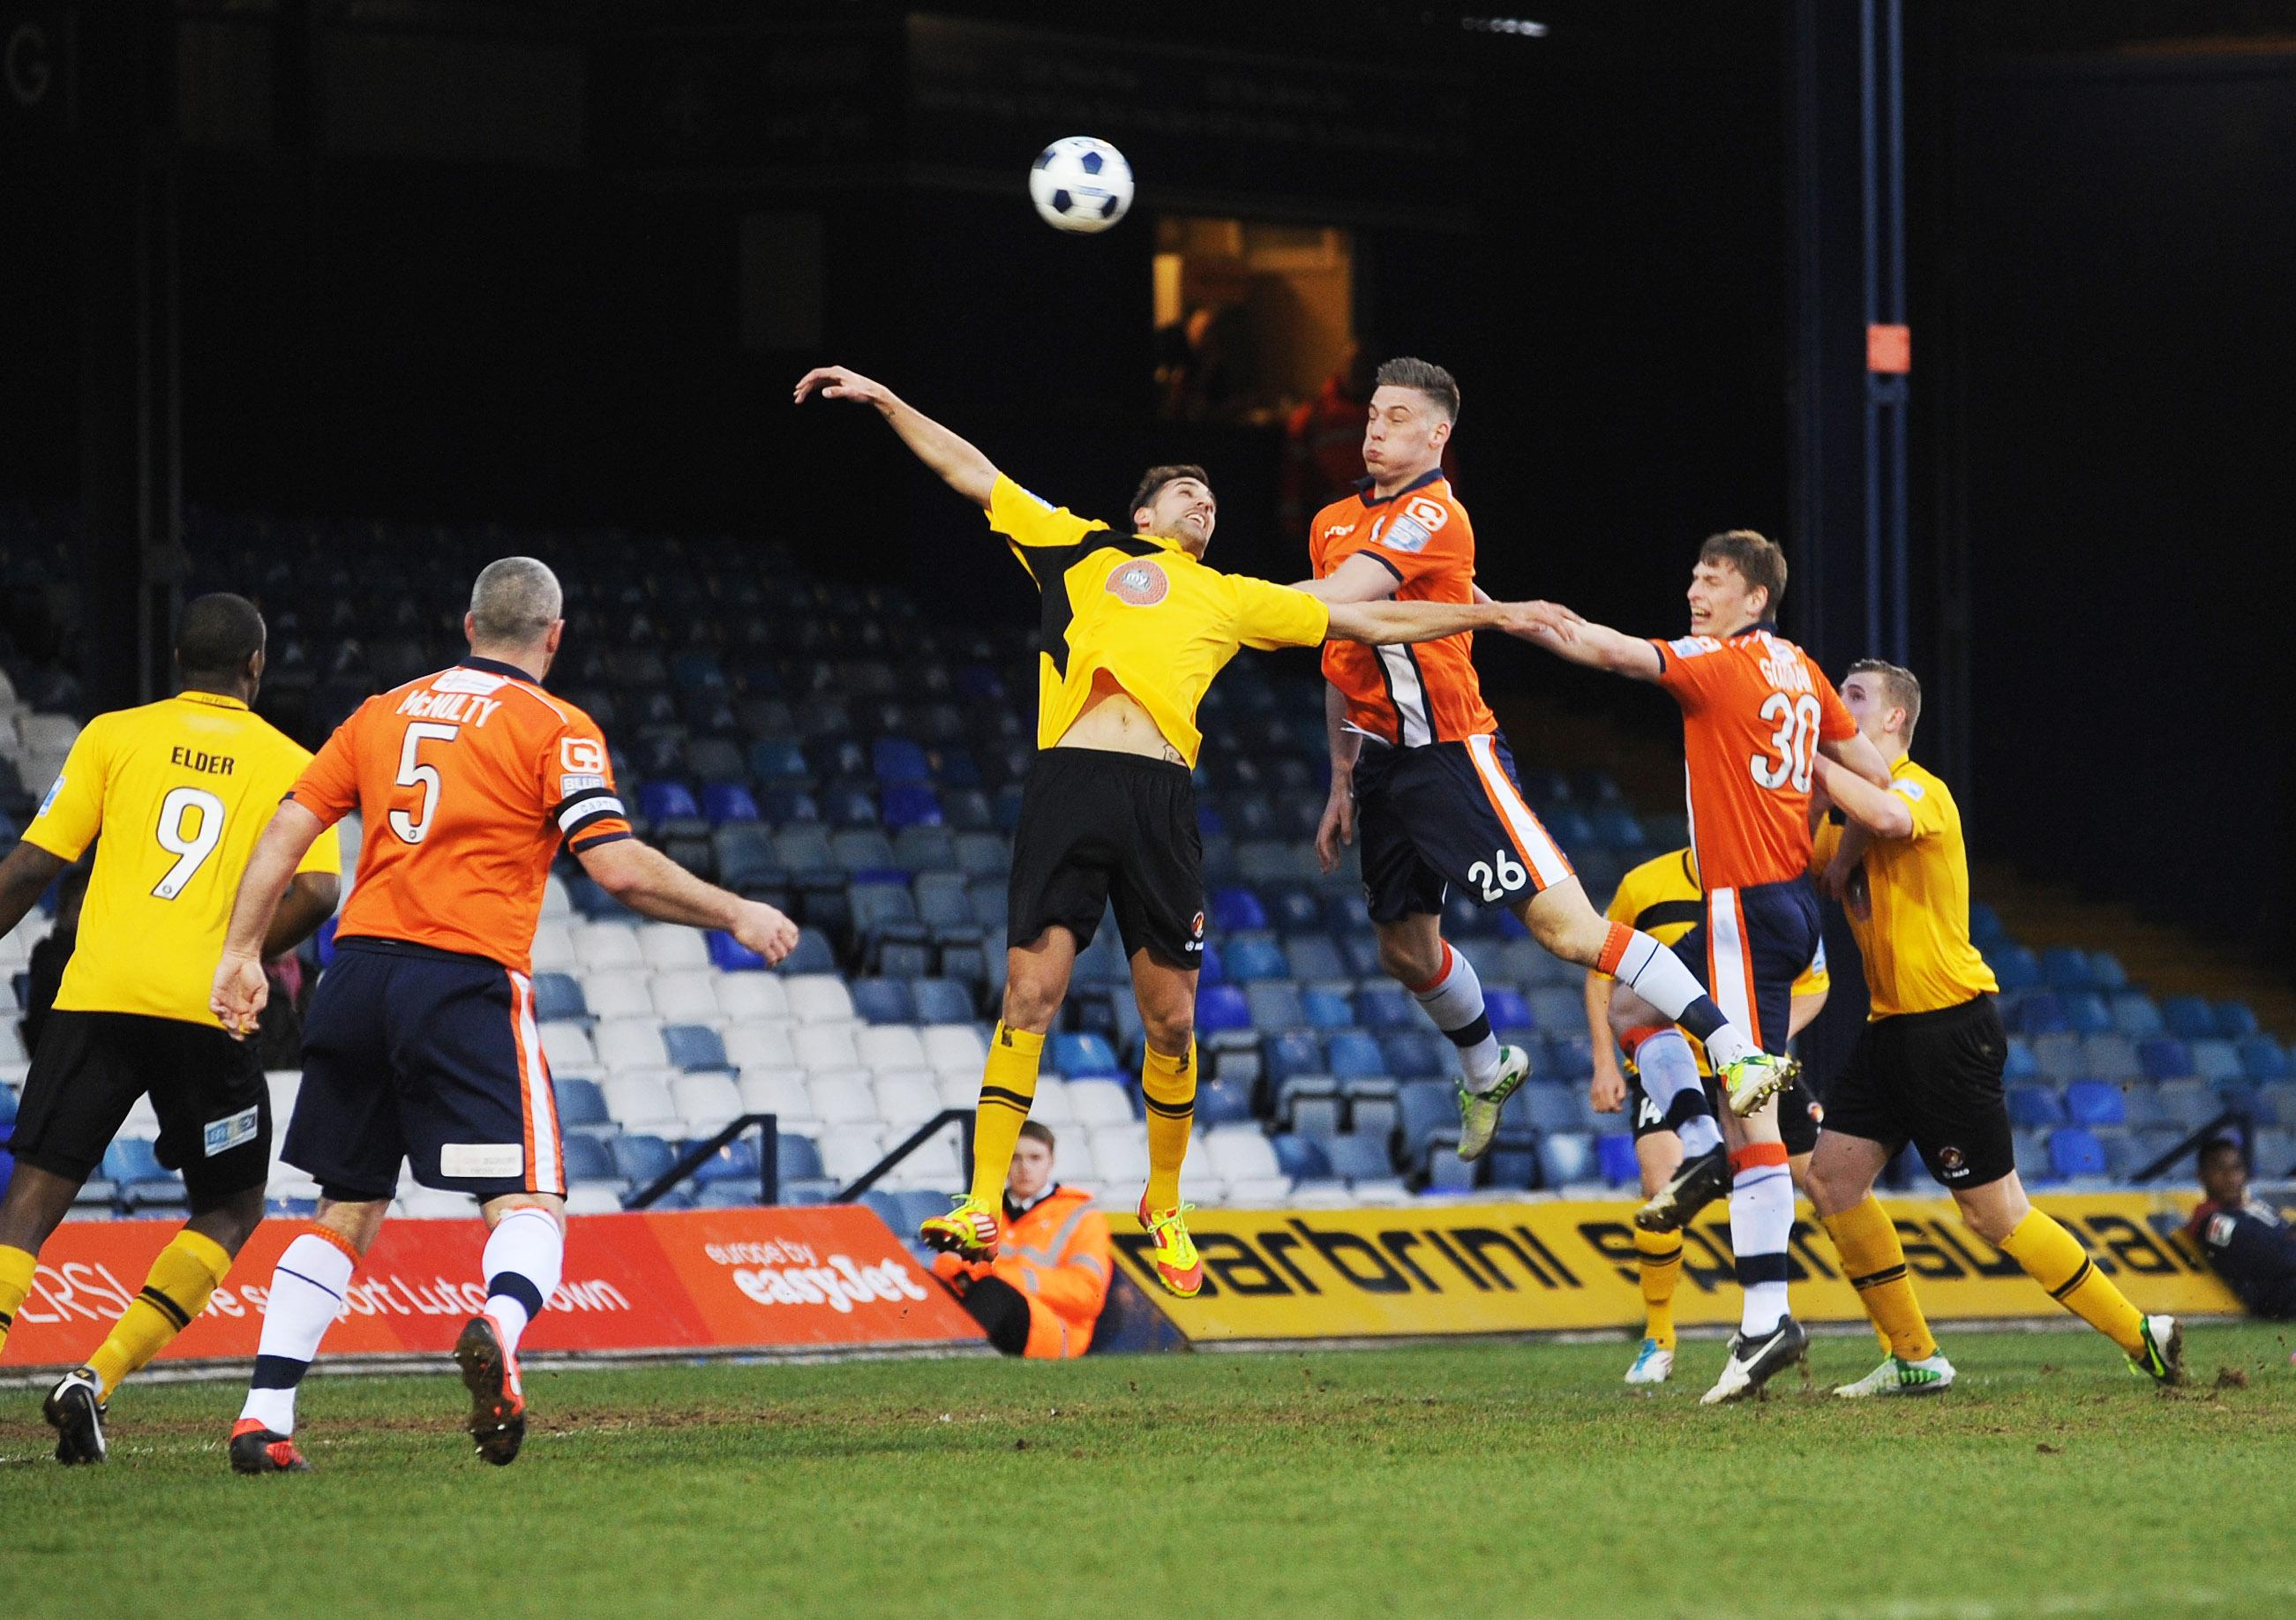 Alex Wall rises highest to win a header